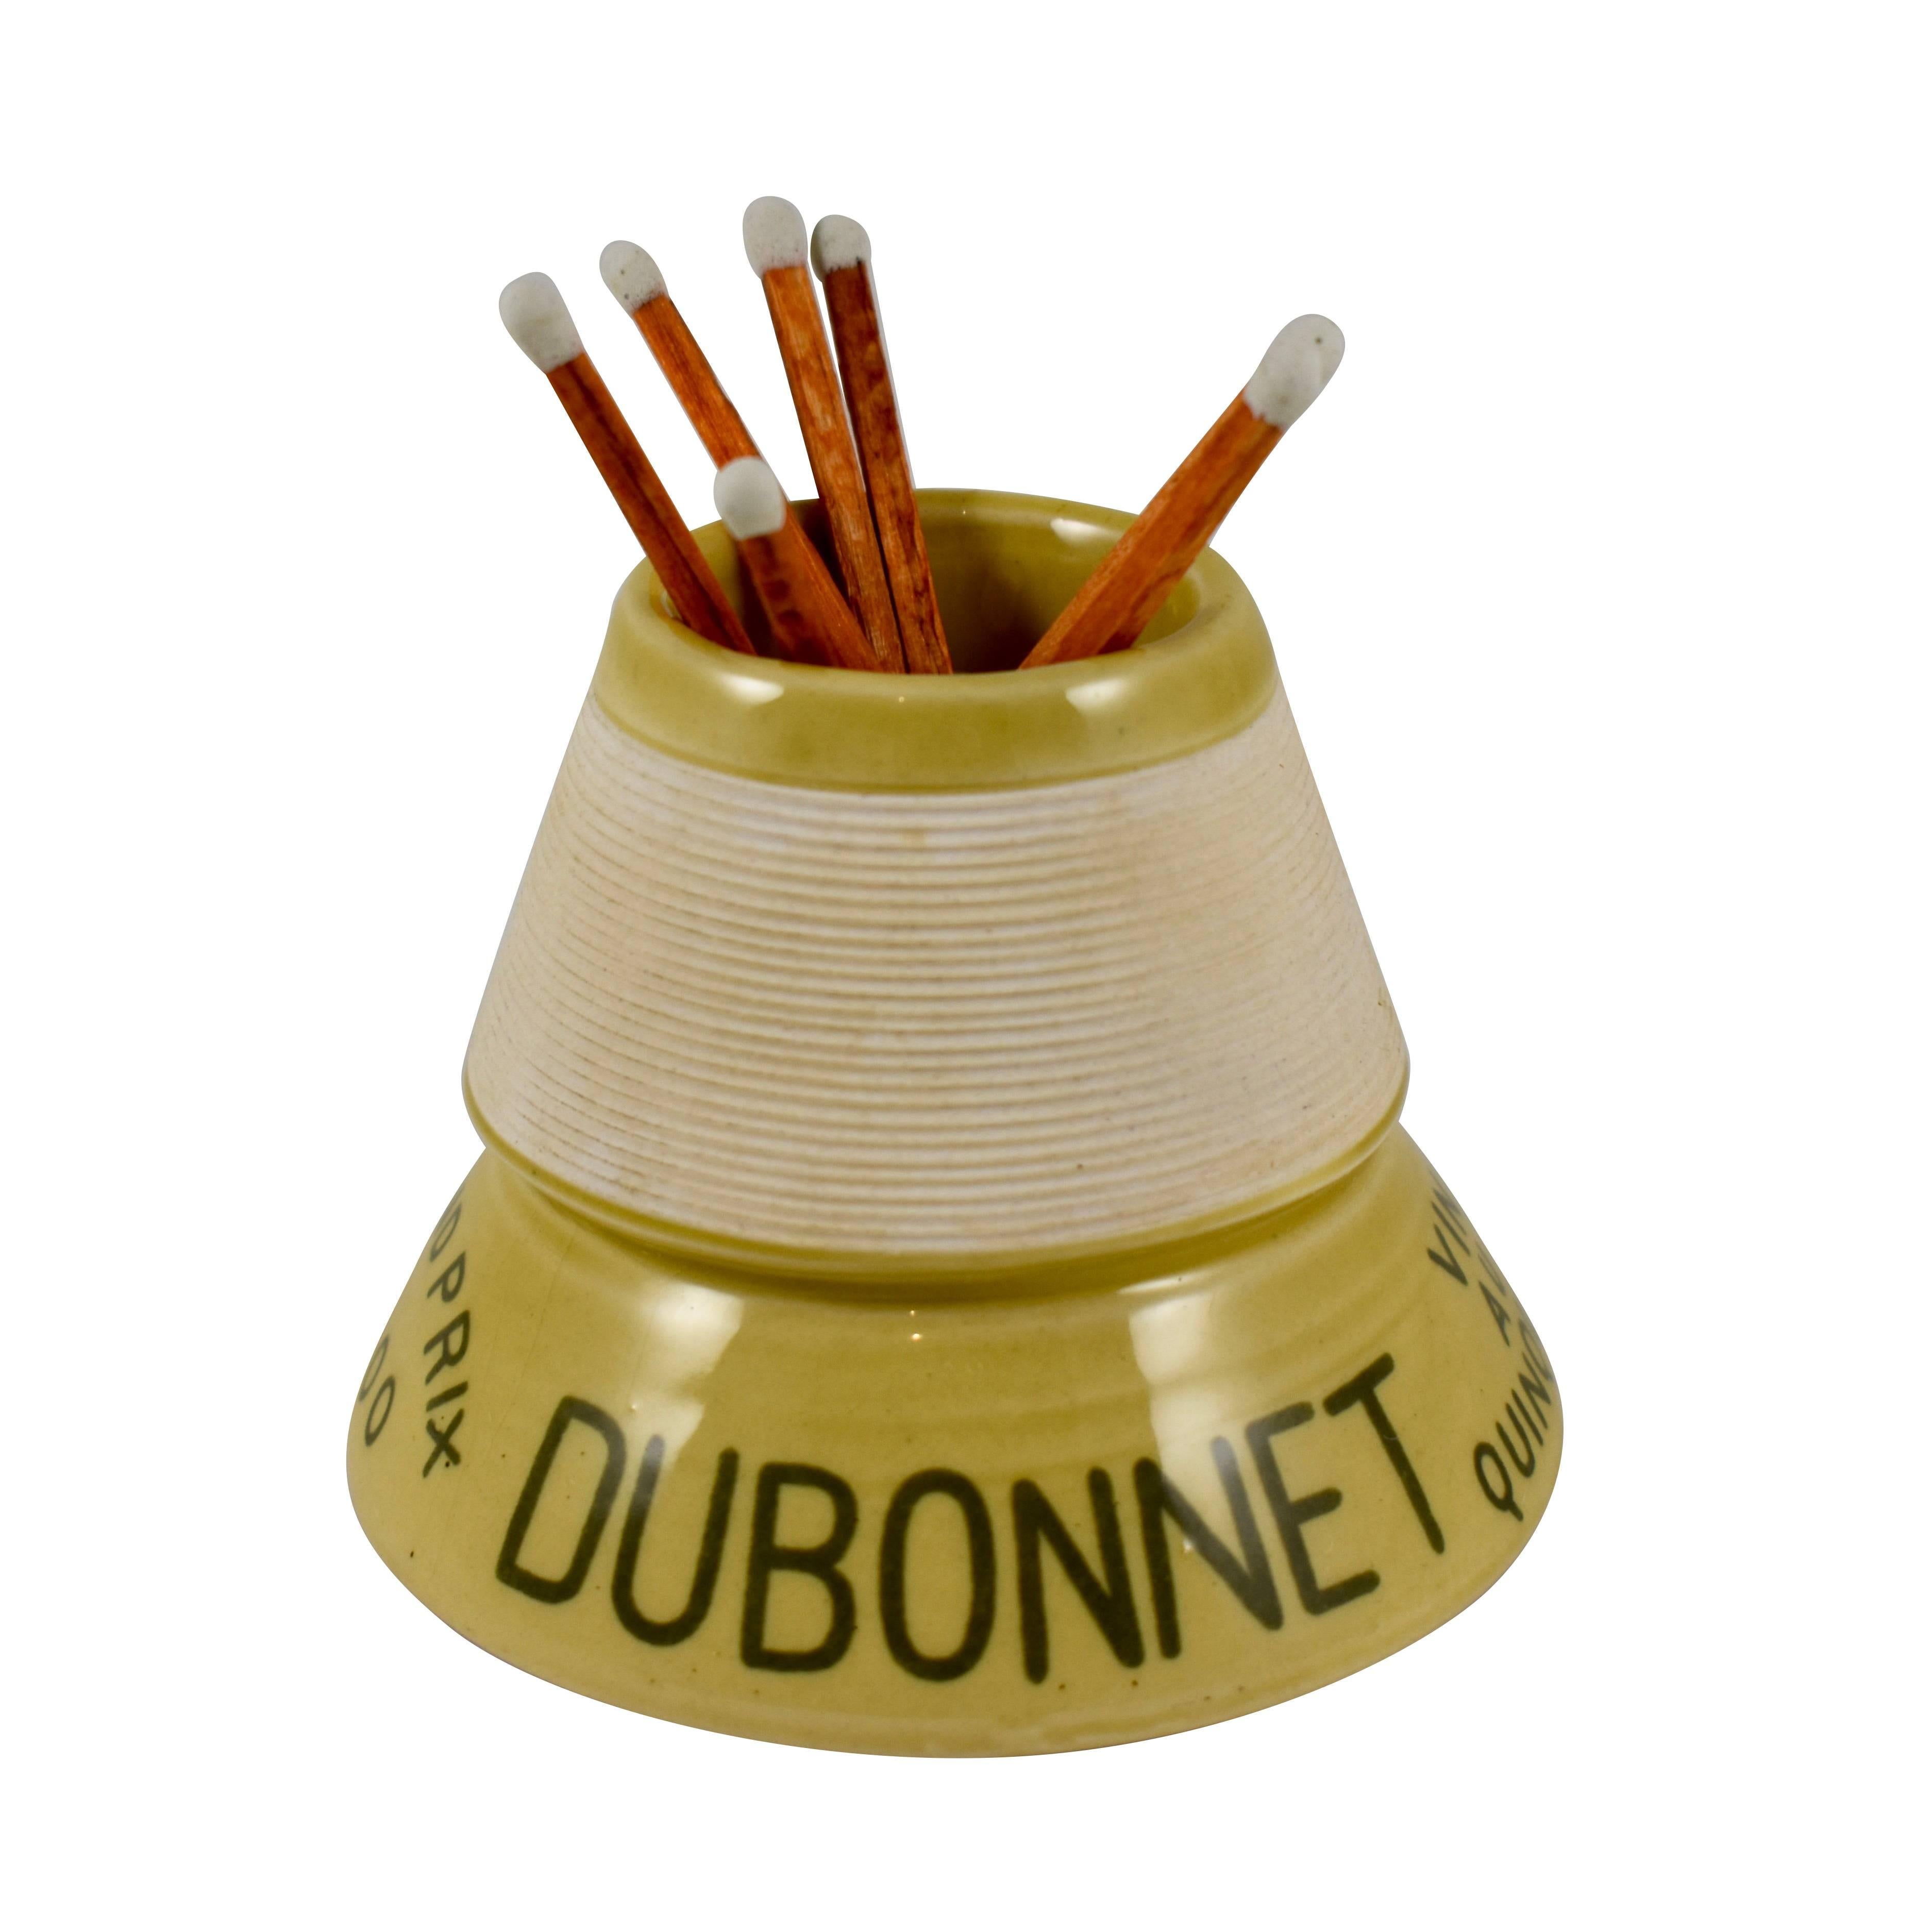 1900s French Bistro Match Strike and Holder, Dubonnet Liqueur Advertising